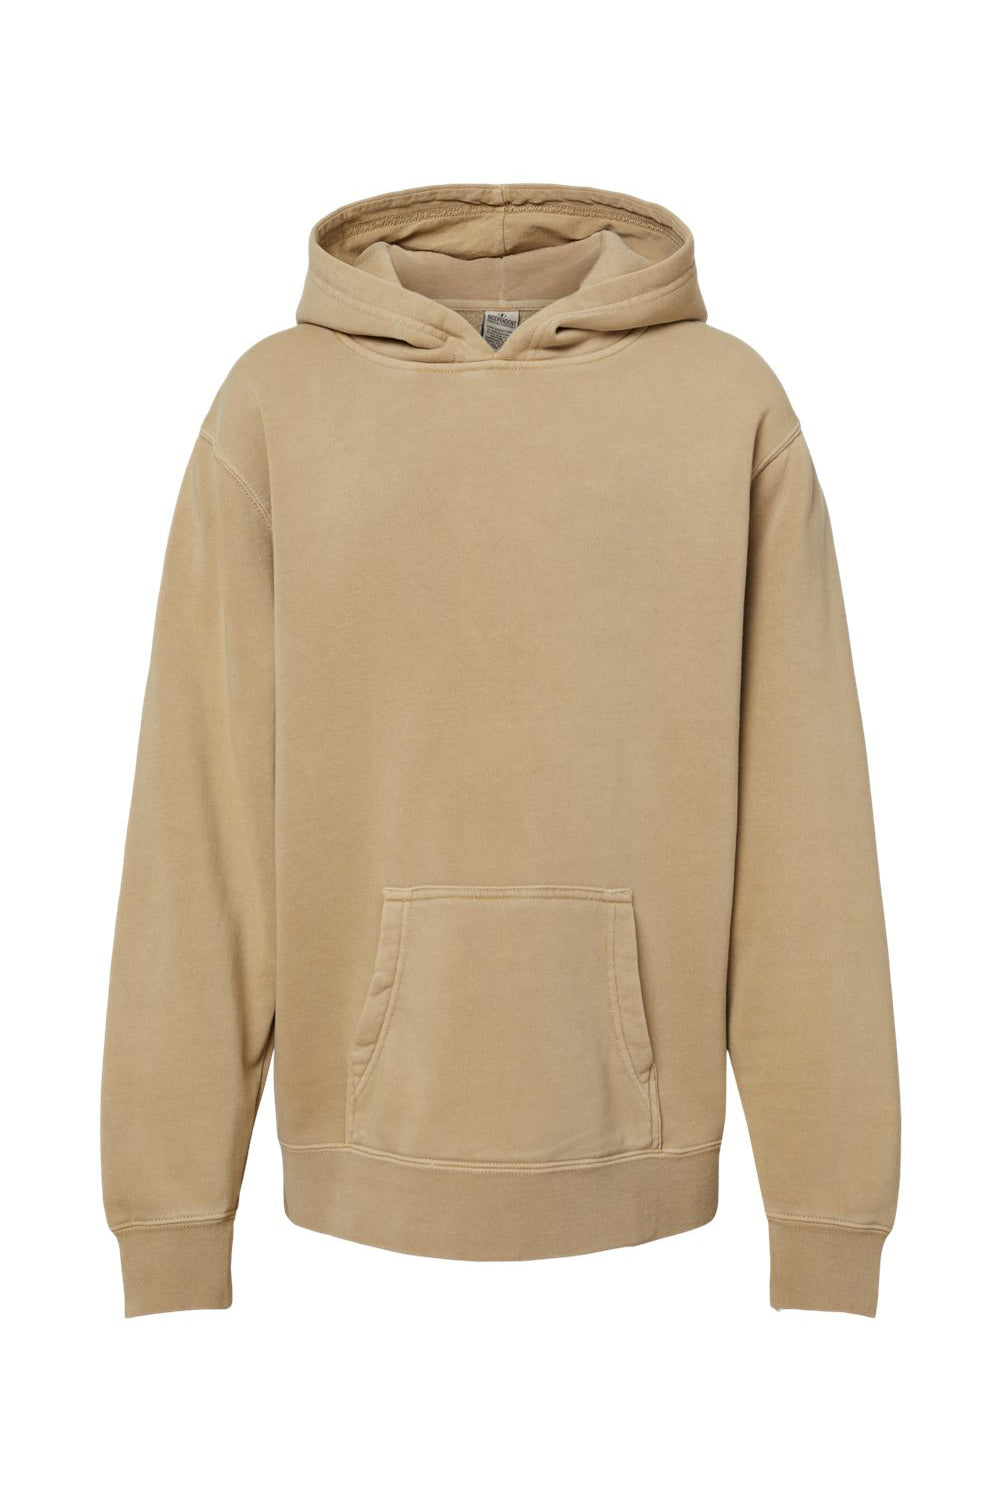 Independent Trading Co. PRM1500Y Youth Pigment Dyed Hooded Sweatshirt Hoodie Sandstone Brown Flat Front